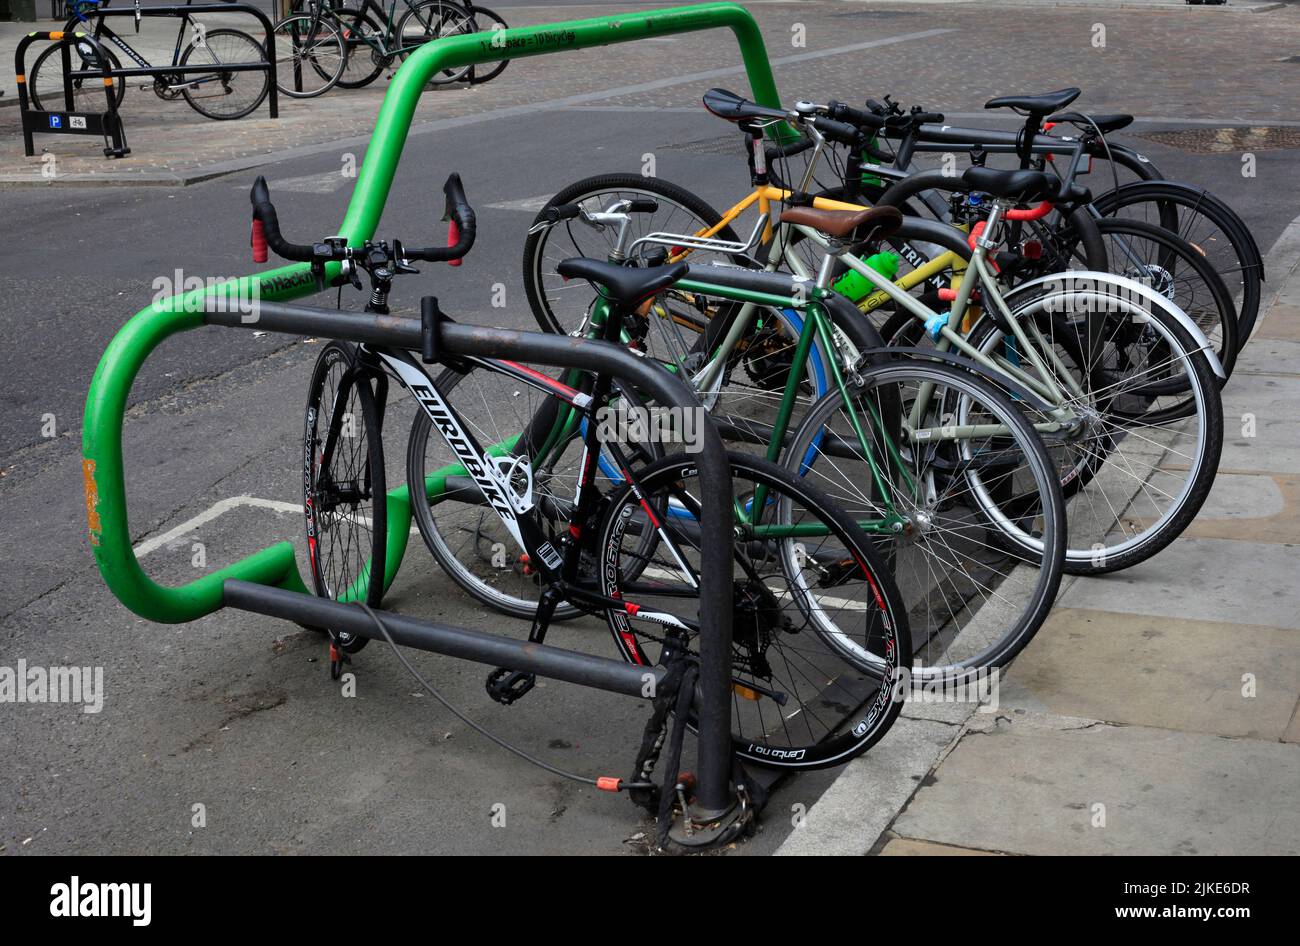 One car equals ten bikes parking space Hackney London Stock Photo